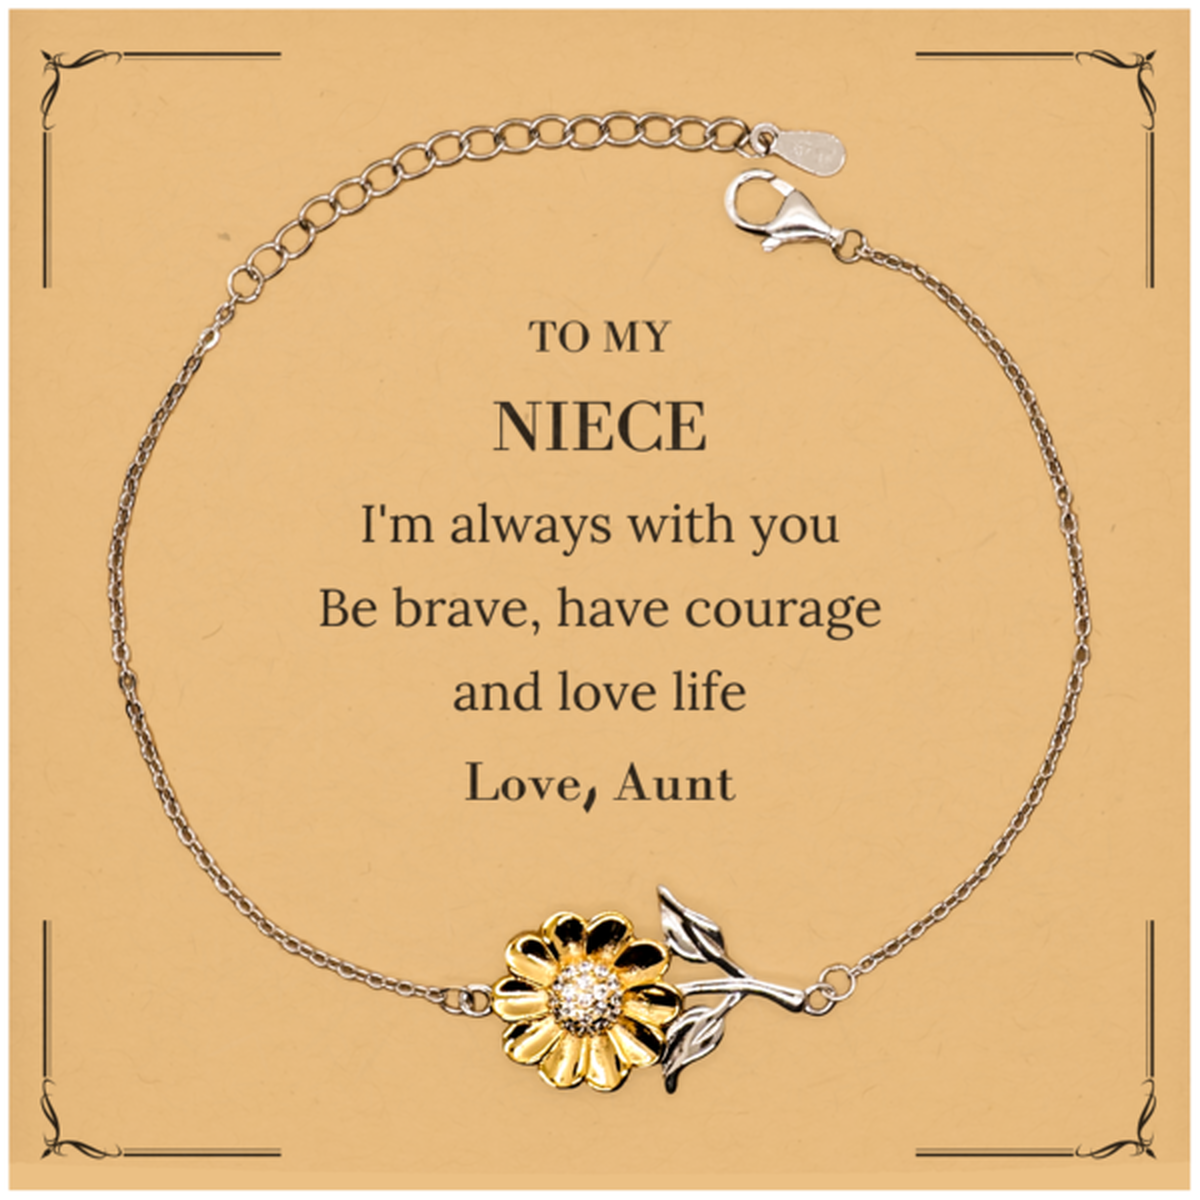 To My Niece Gifts from Aunt, Unique Sunflower Bracelet Inspirational Christmas Birthday Graduation Gifts for Niece I'm always with you. Be brave, have courage and love life. Love, Aunt